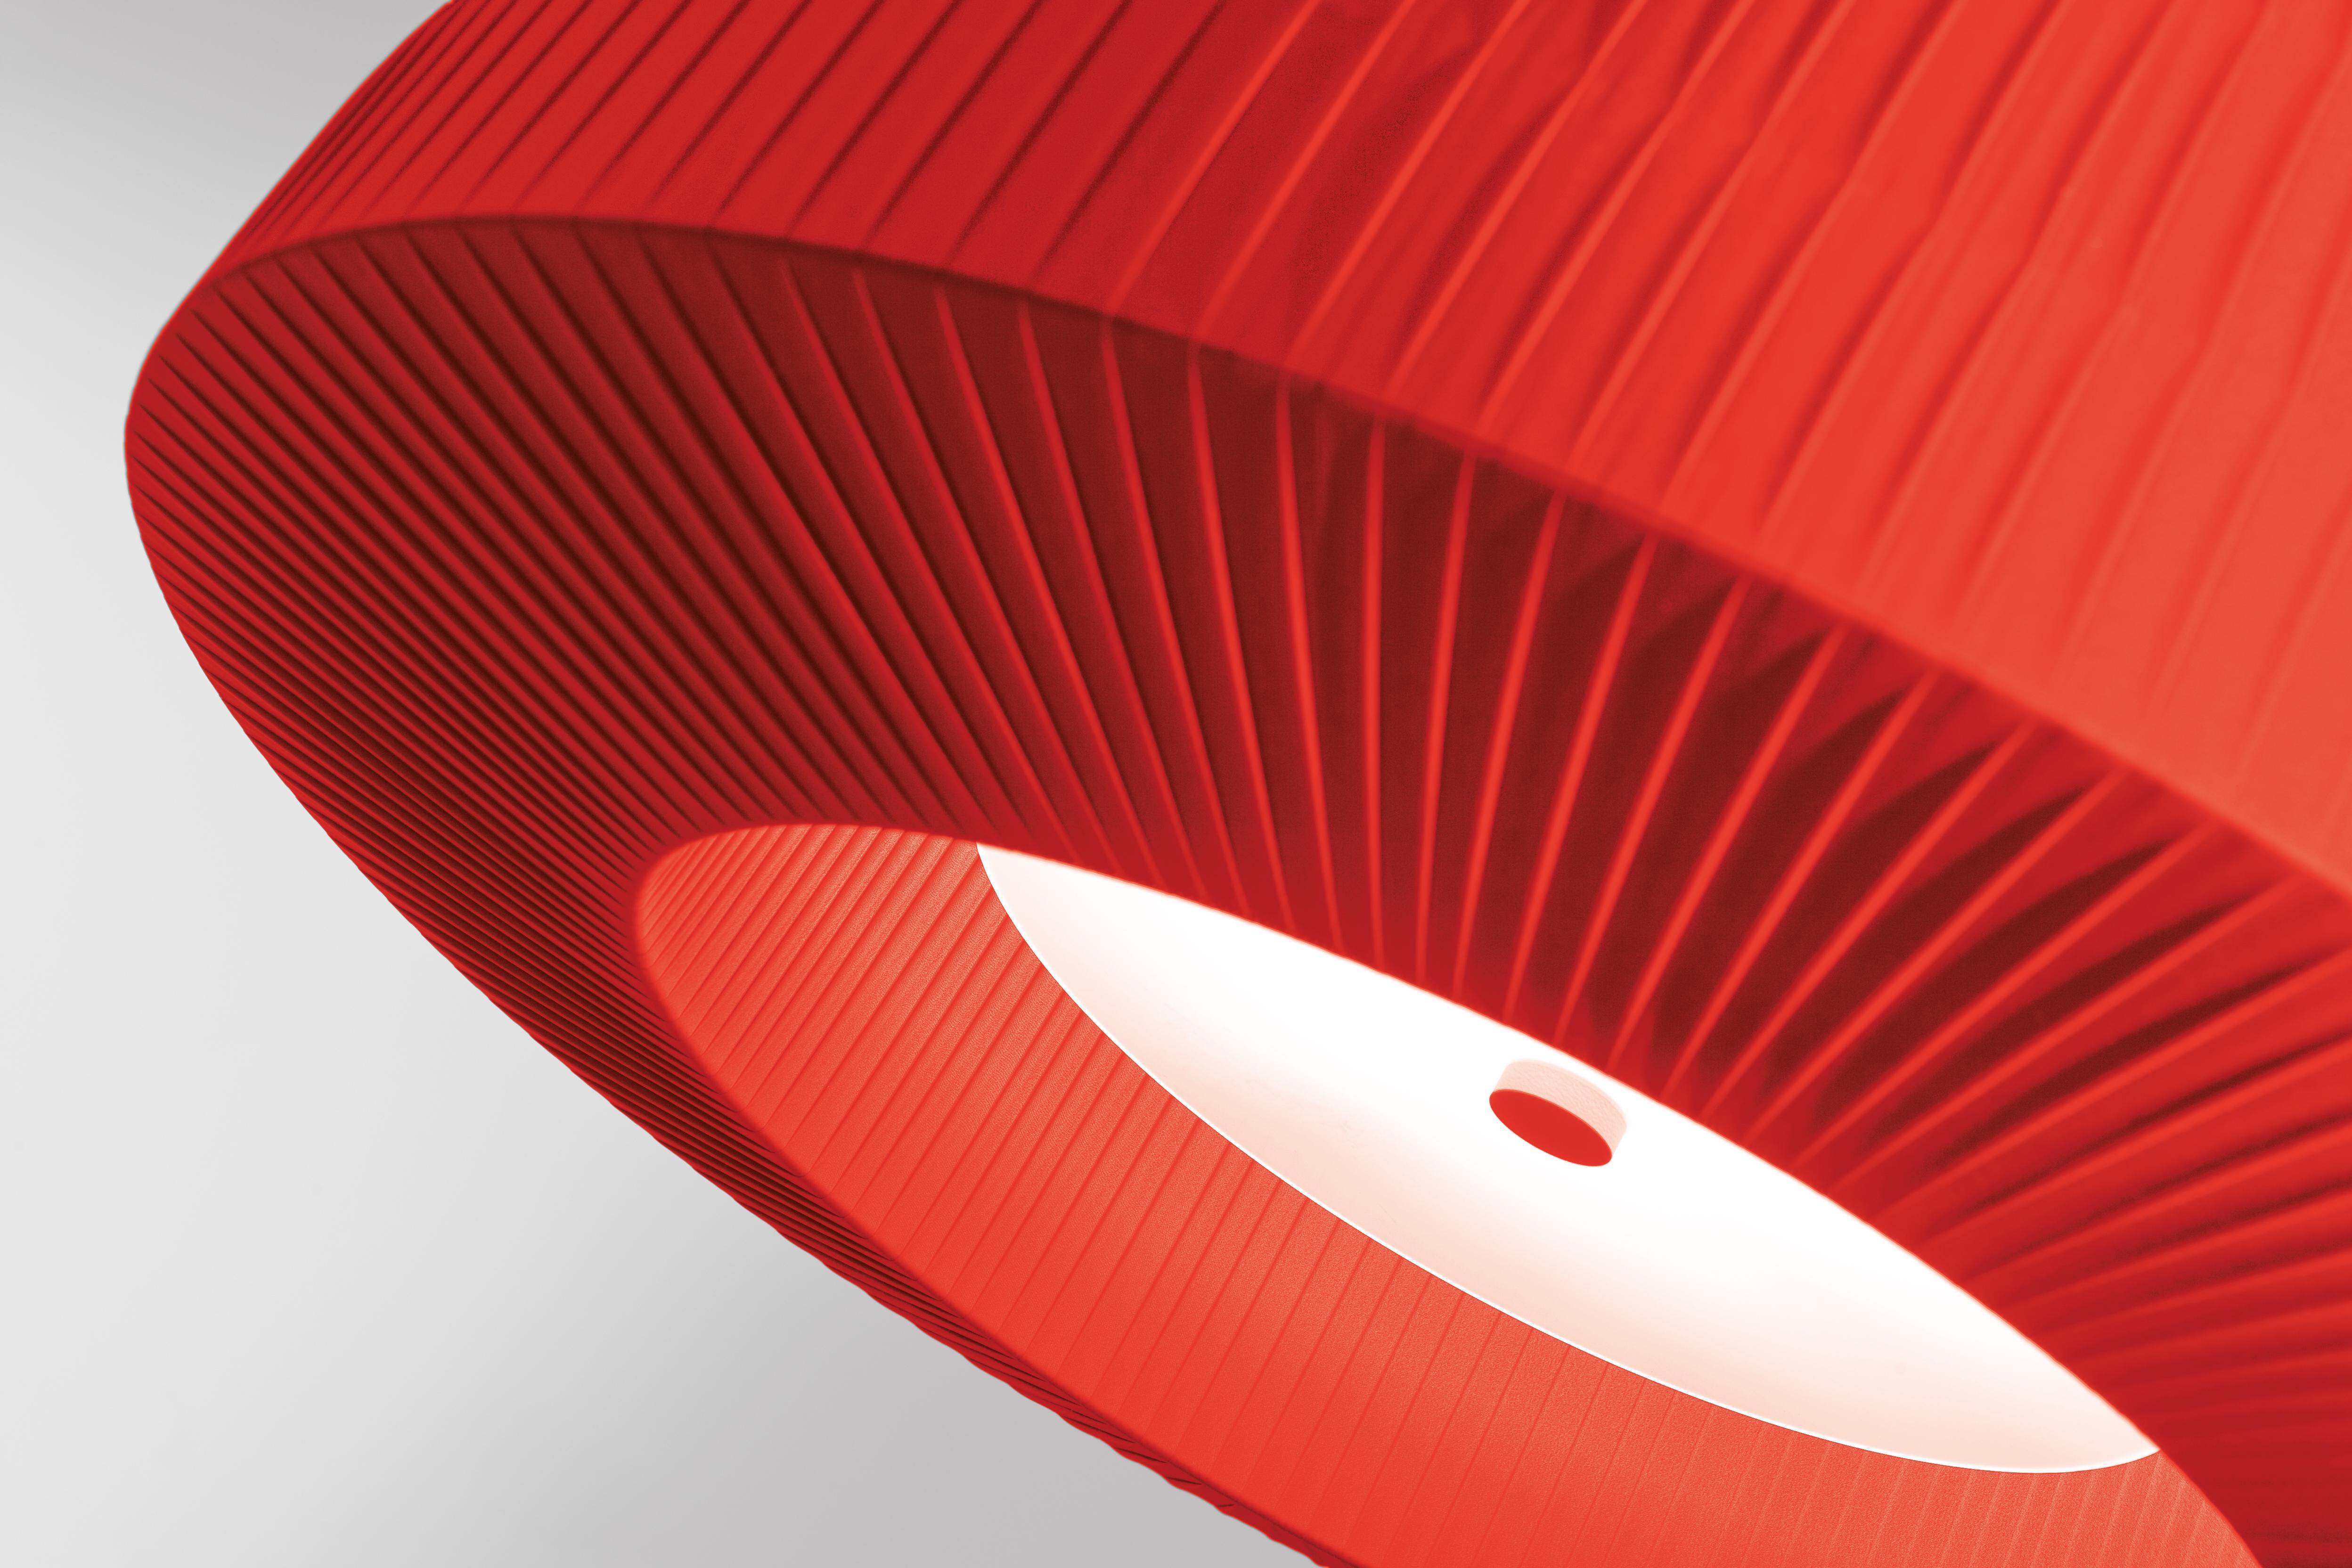 Axolight Bell Large Pendant Lamp in Red by Manuel & Vanessa Vivian

The ceiling version of Bell is in continuity with the aesthetic of the pendant one. The lightness given by the fabric, the multidimensionality and the chromatic variations remain